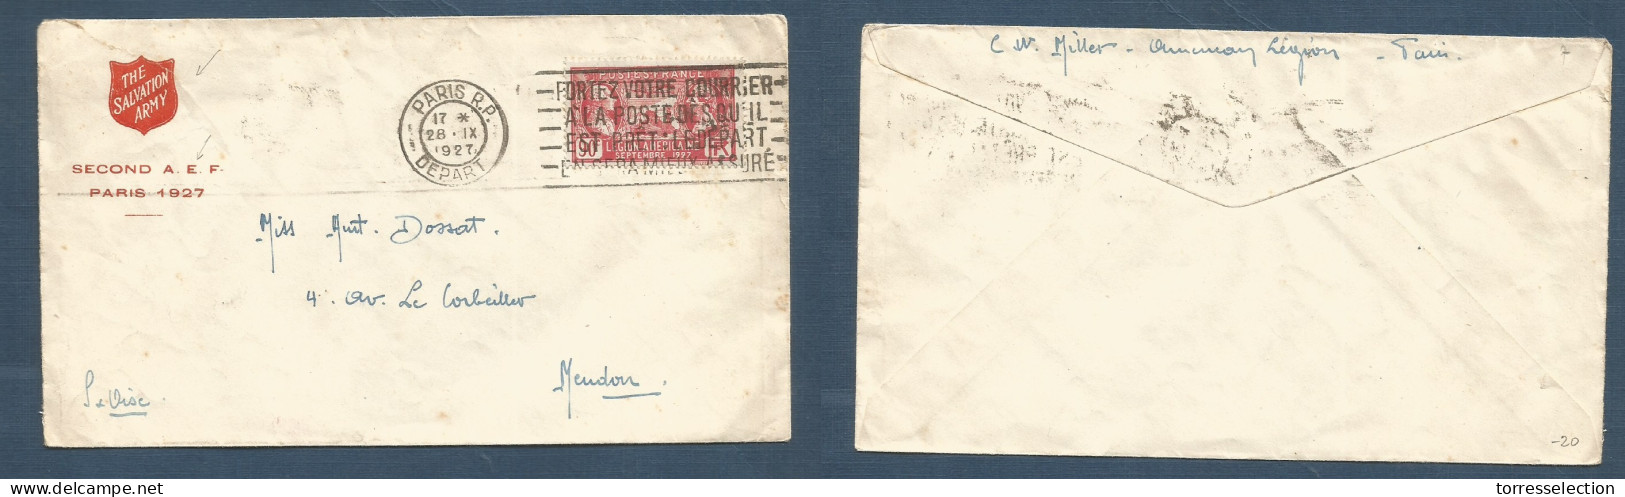 MILITARY MAIL. 1927 (28 Sept) USA, American Forces- Second AEF. Salvation Army Fkd Envelope. America Legion. Local Fkd U - Posta Militare (PM)